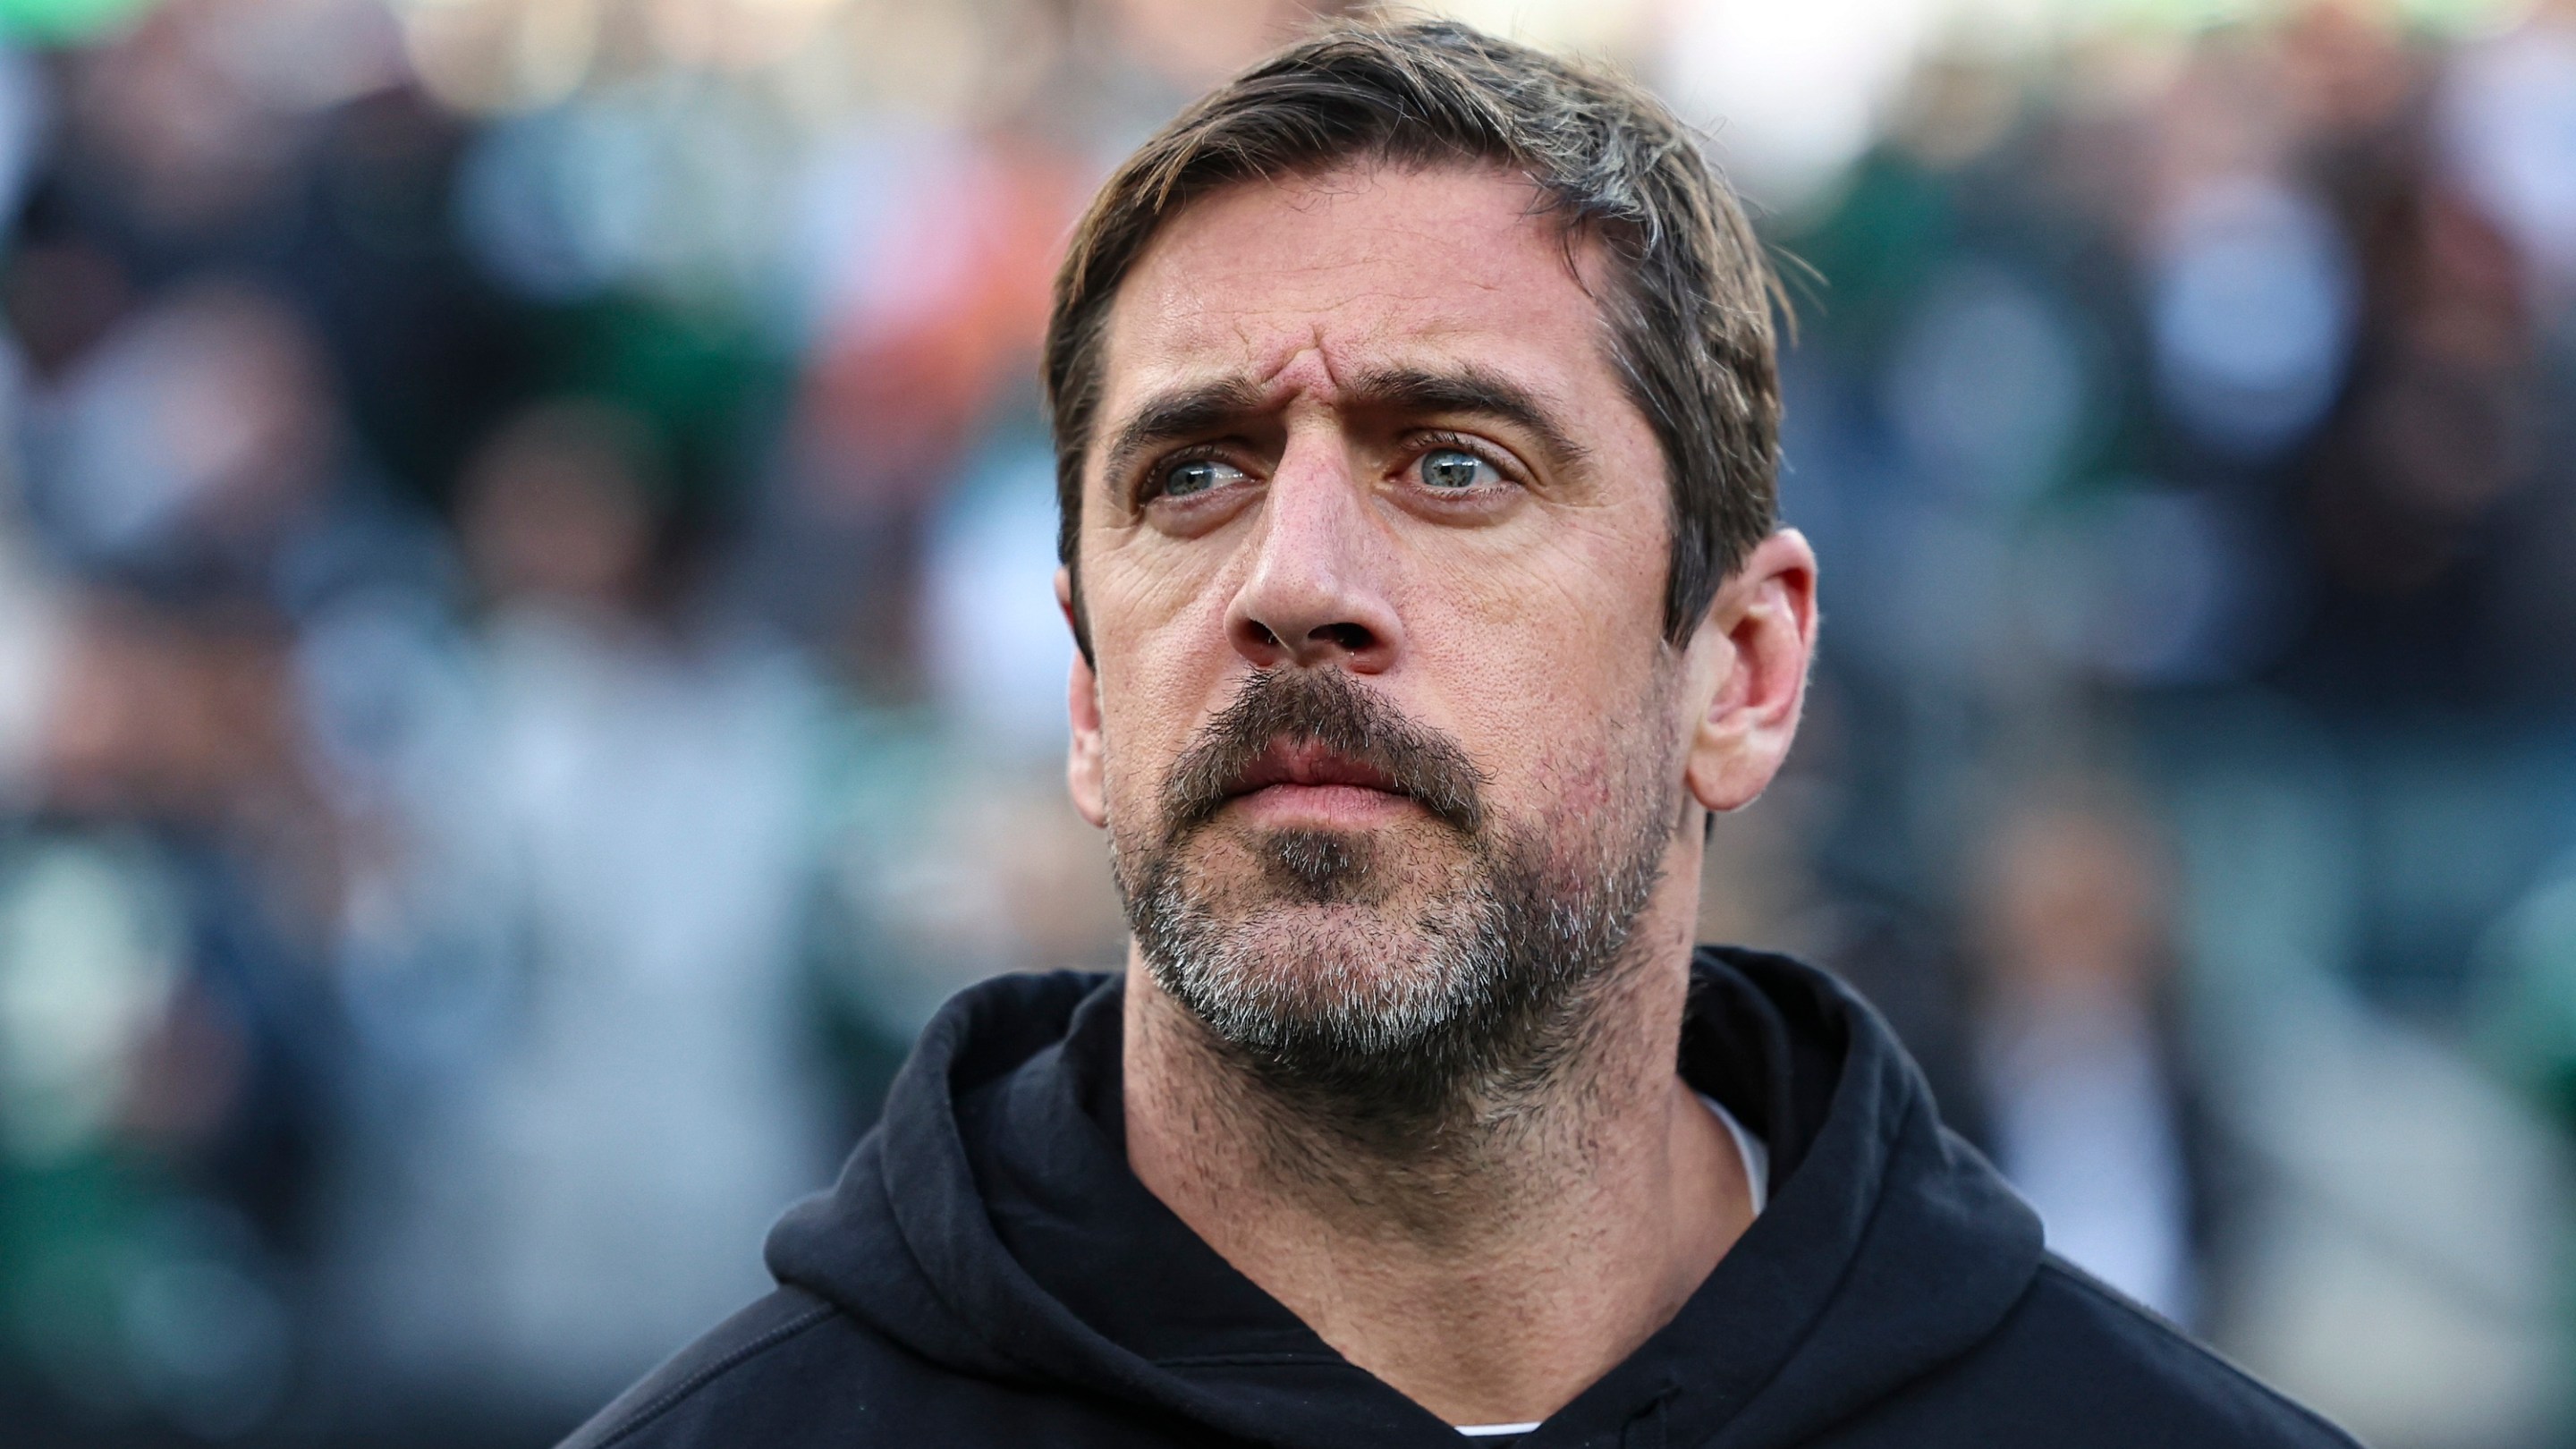 EAST RUTHERFORD, NJ - NOVEMBER 24: Aaron Rodgers #8 of the New York Jets looks on from the sideline during the national anthem prior to an NFL football game against the Miami Dolphins at MetLife Stadium on November 24, 2023 in East Rutherford, New Jersey. (Photo by Perry Knotts/Getty Images)